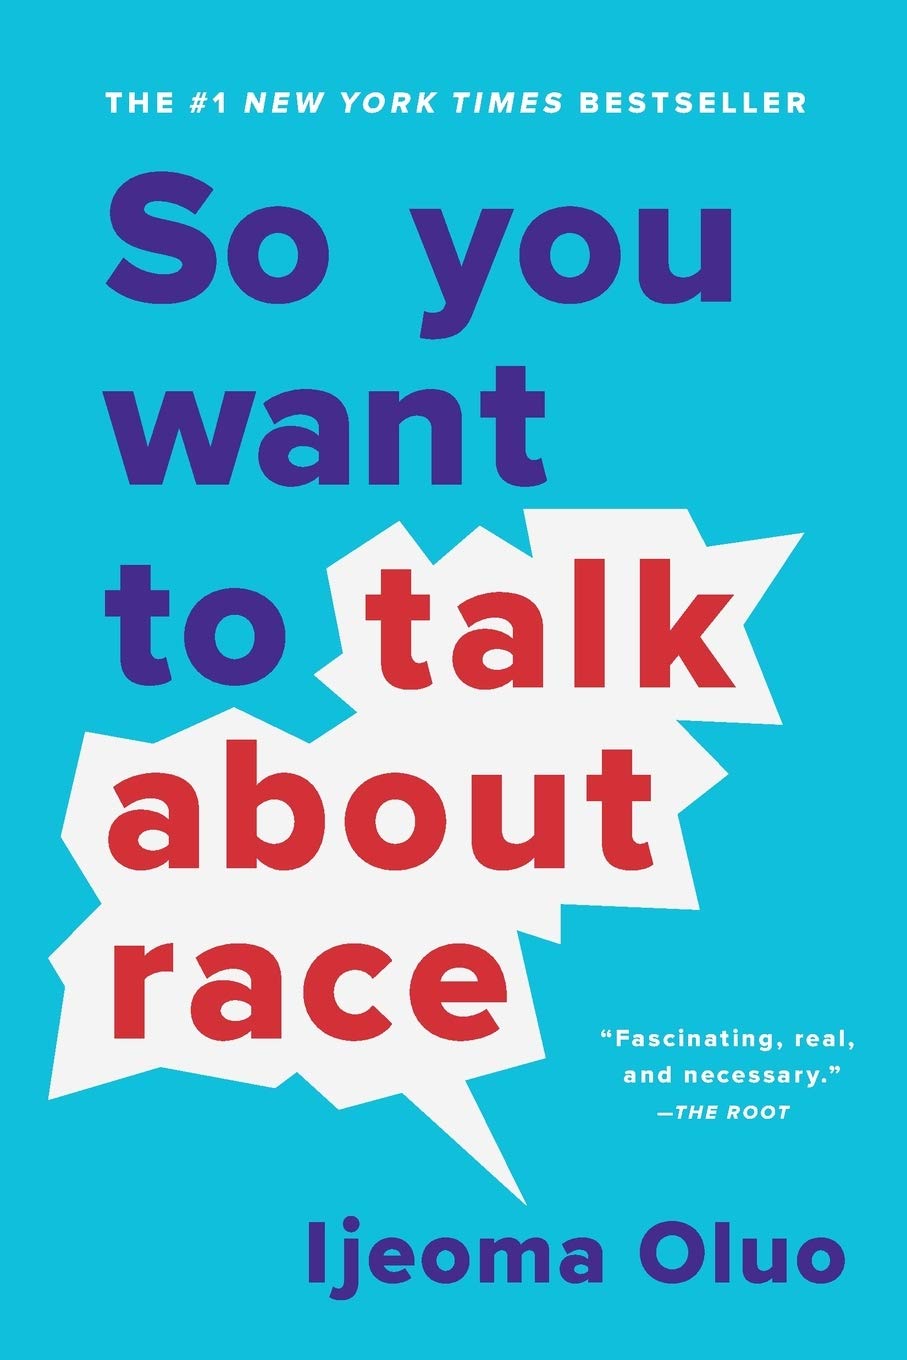 Ijeoma Oluo: So you want to talk about race (2018)